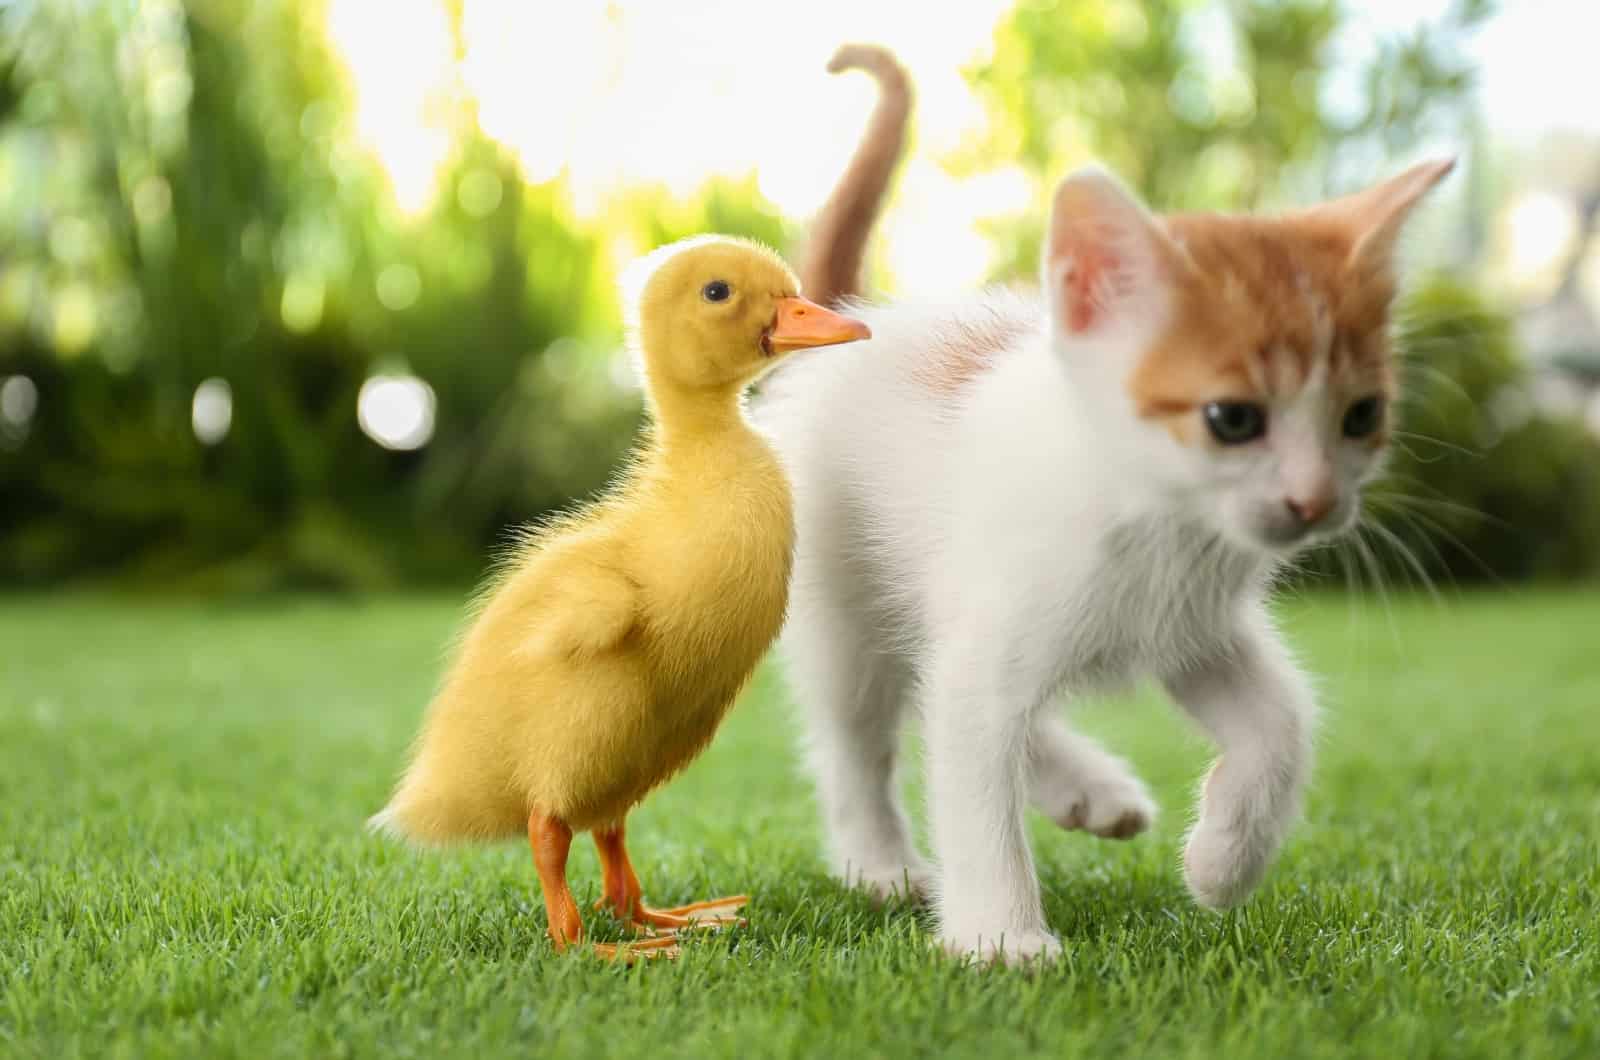 kitten playing with little duck on grass